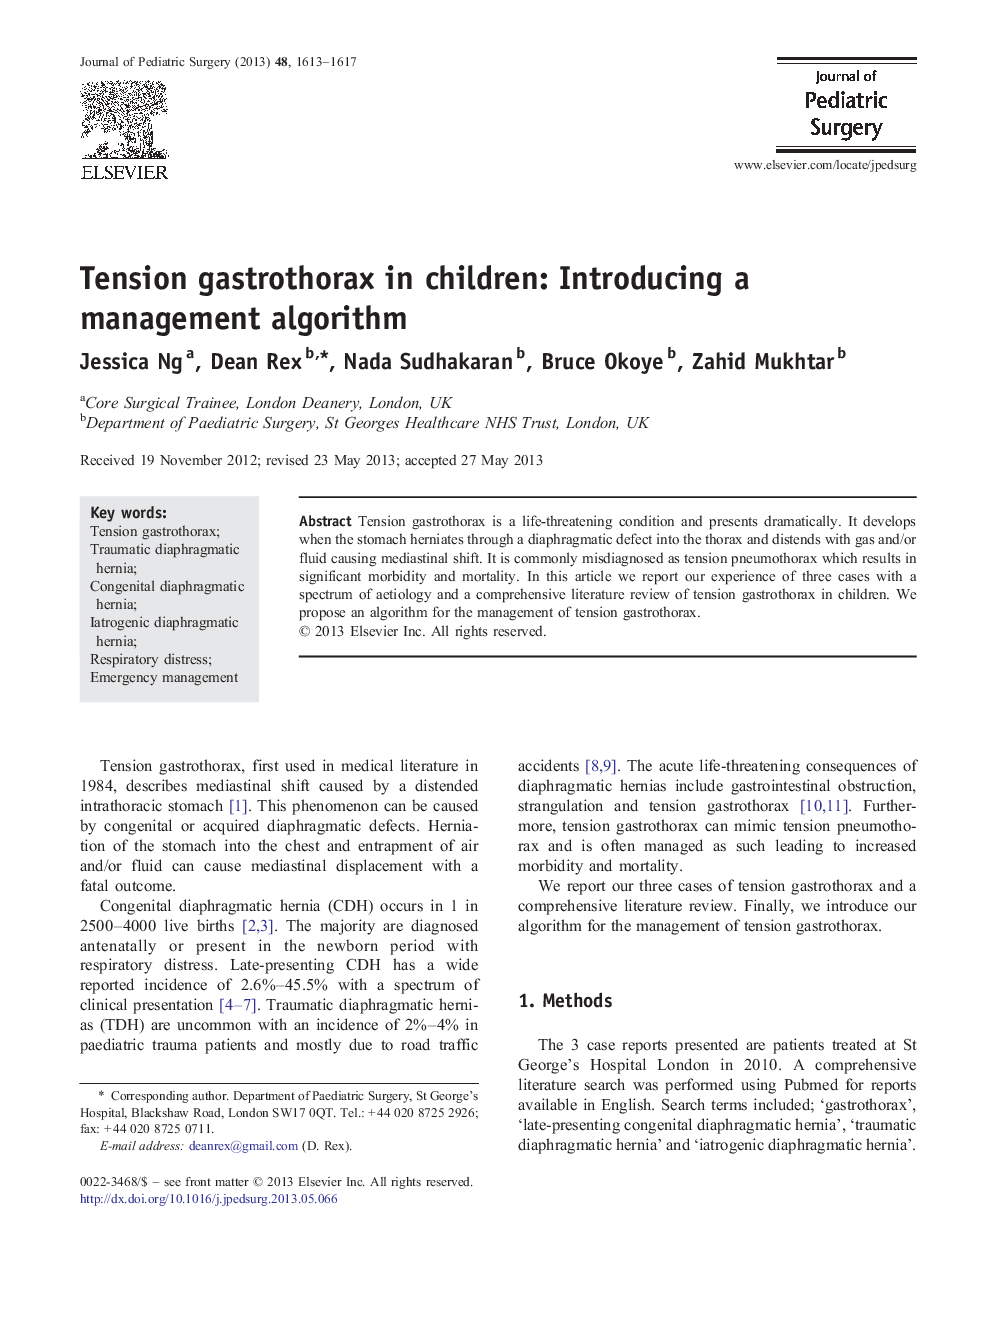 Tension gastrothorax in children: Introducing a management algorithm